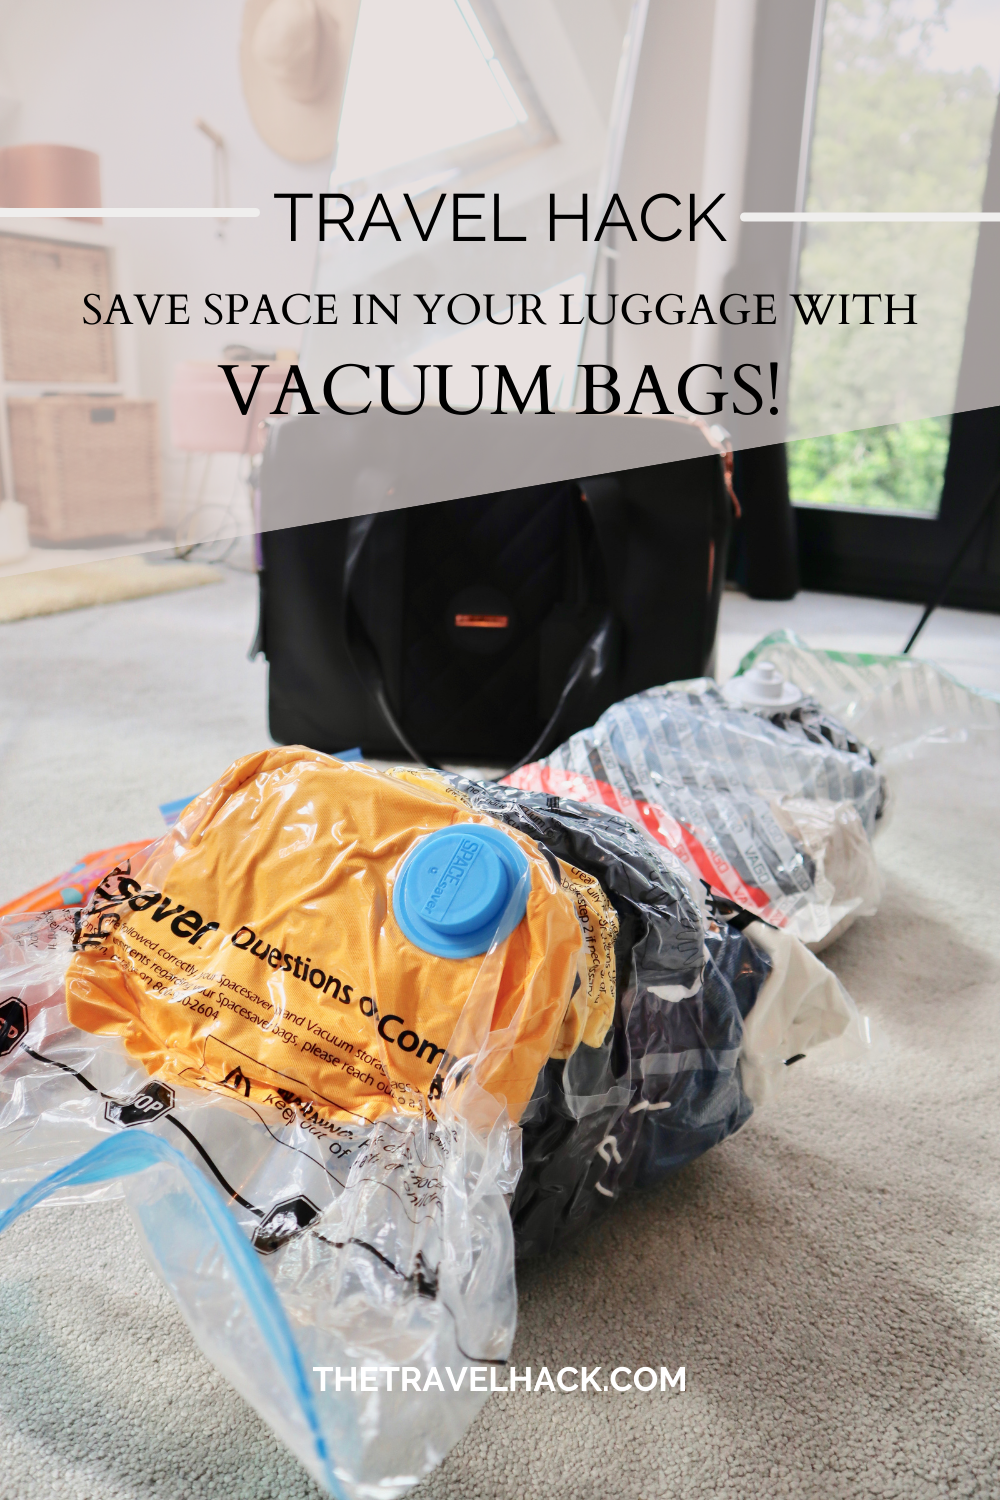 Using vacuum sealed bags for travelling: The BEST way to save luggage space